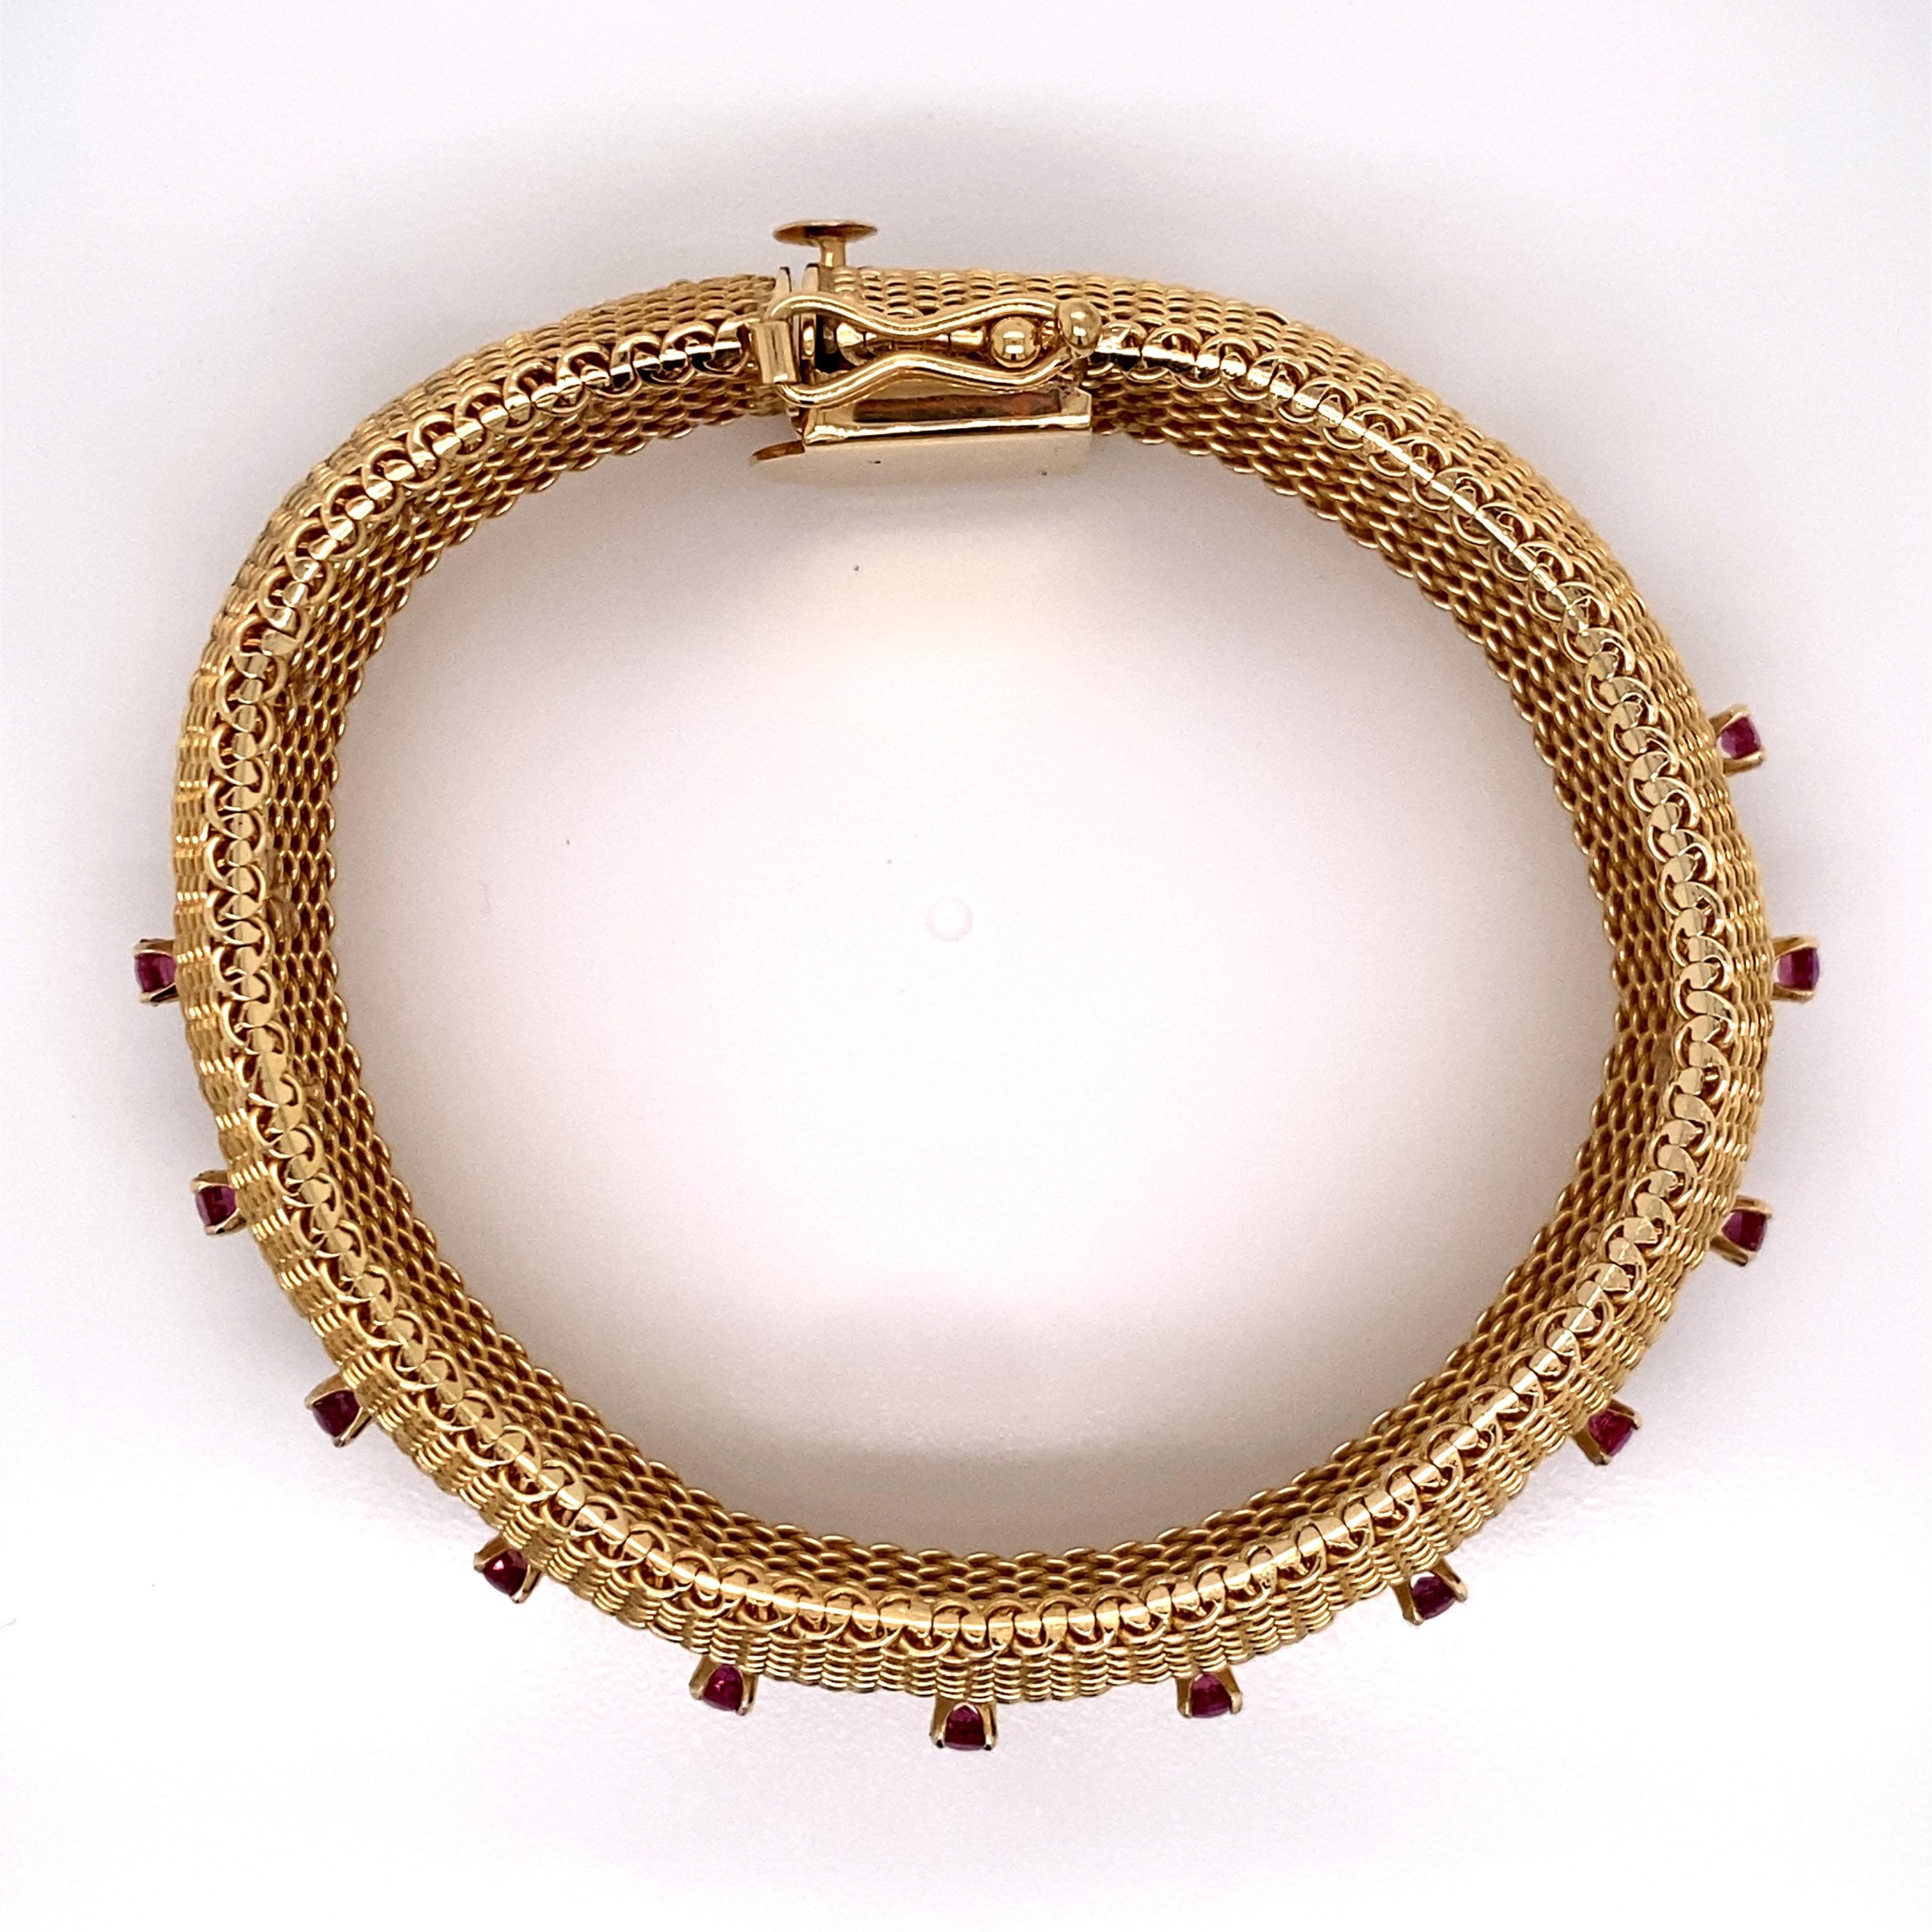 Vintage 1960s 14 Karat Yellow Gold Mesh Bracelet with Rubies In Good Condition For Sale In Boston, MA